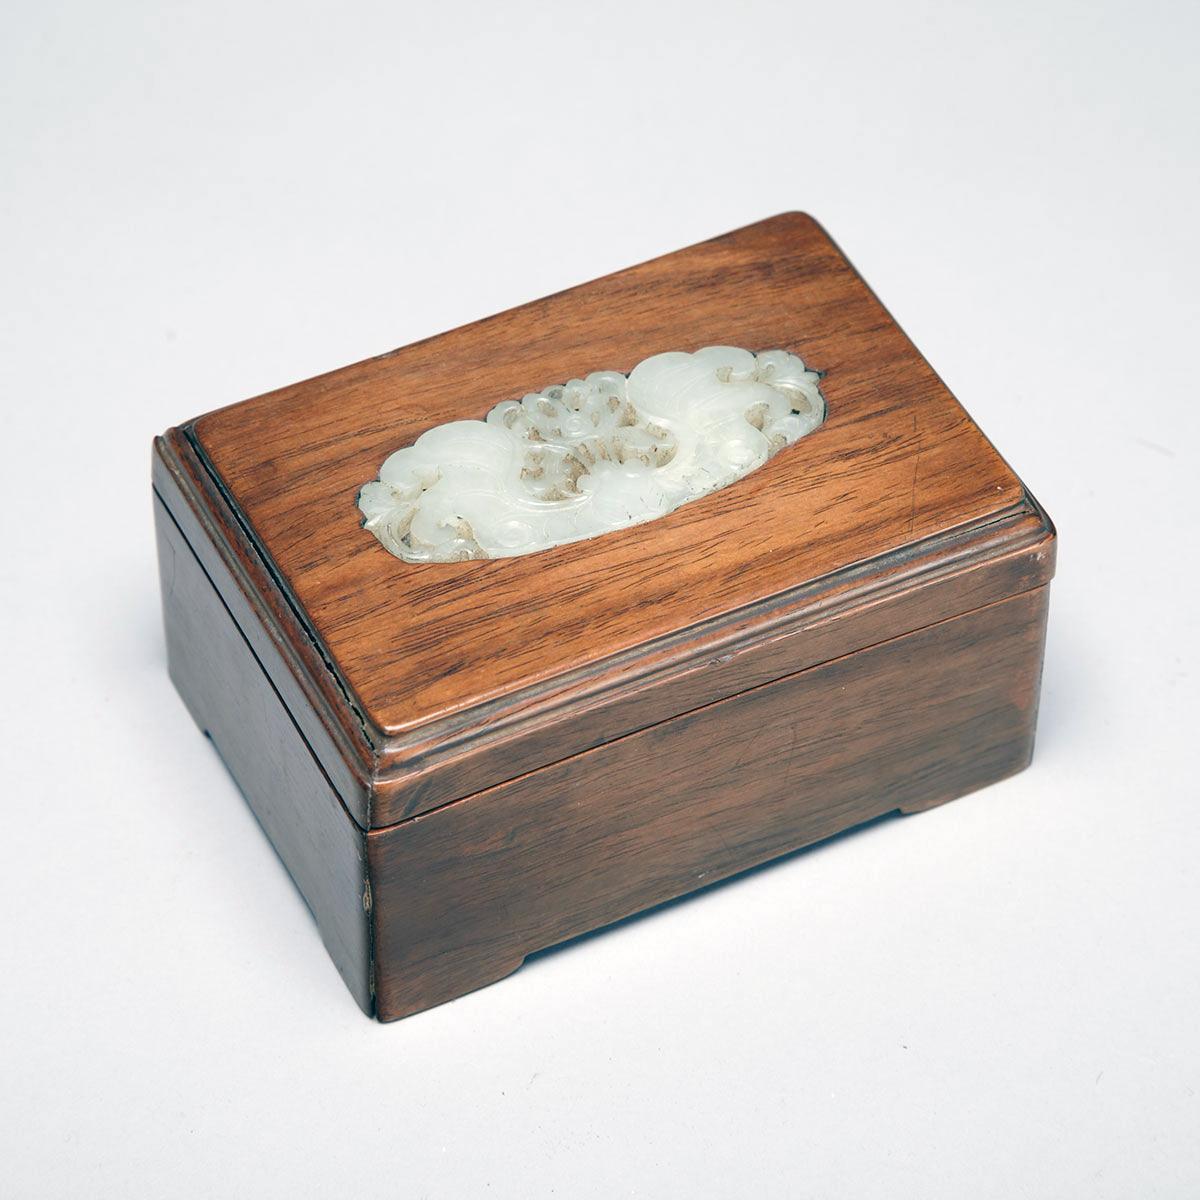 Hardwood Box and Cover with Jade Inlay